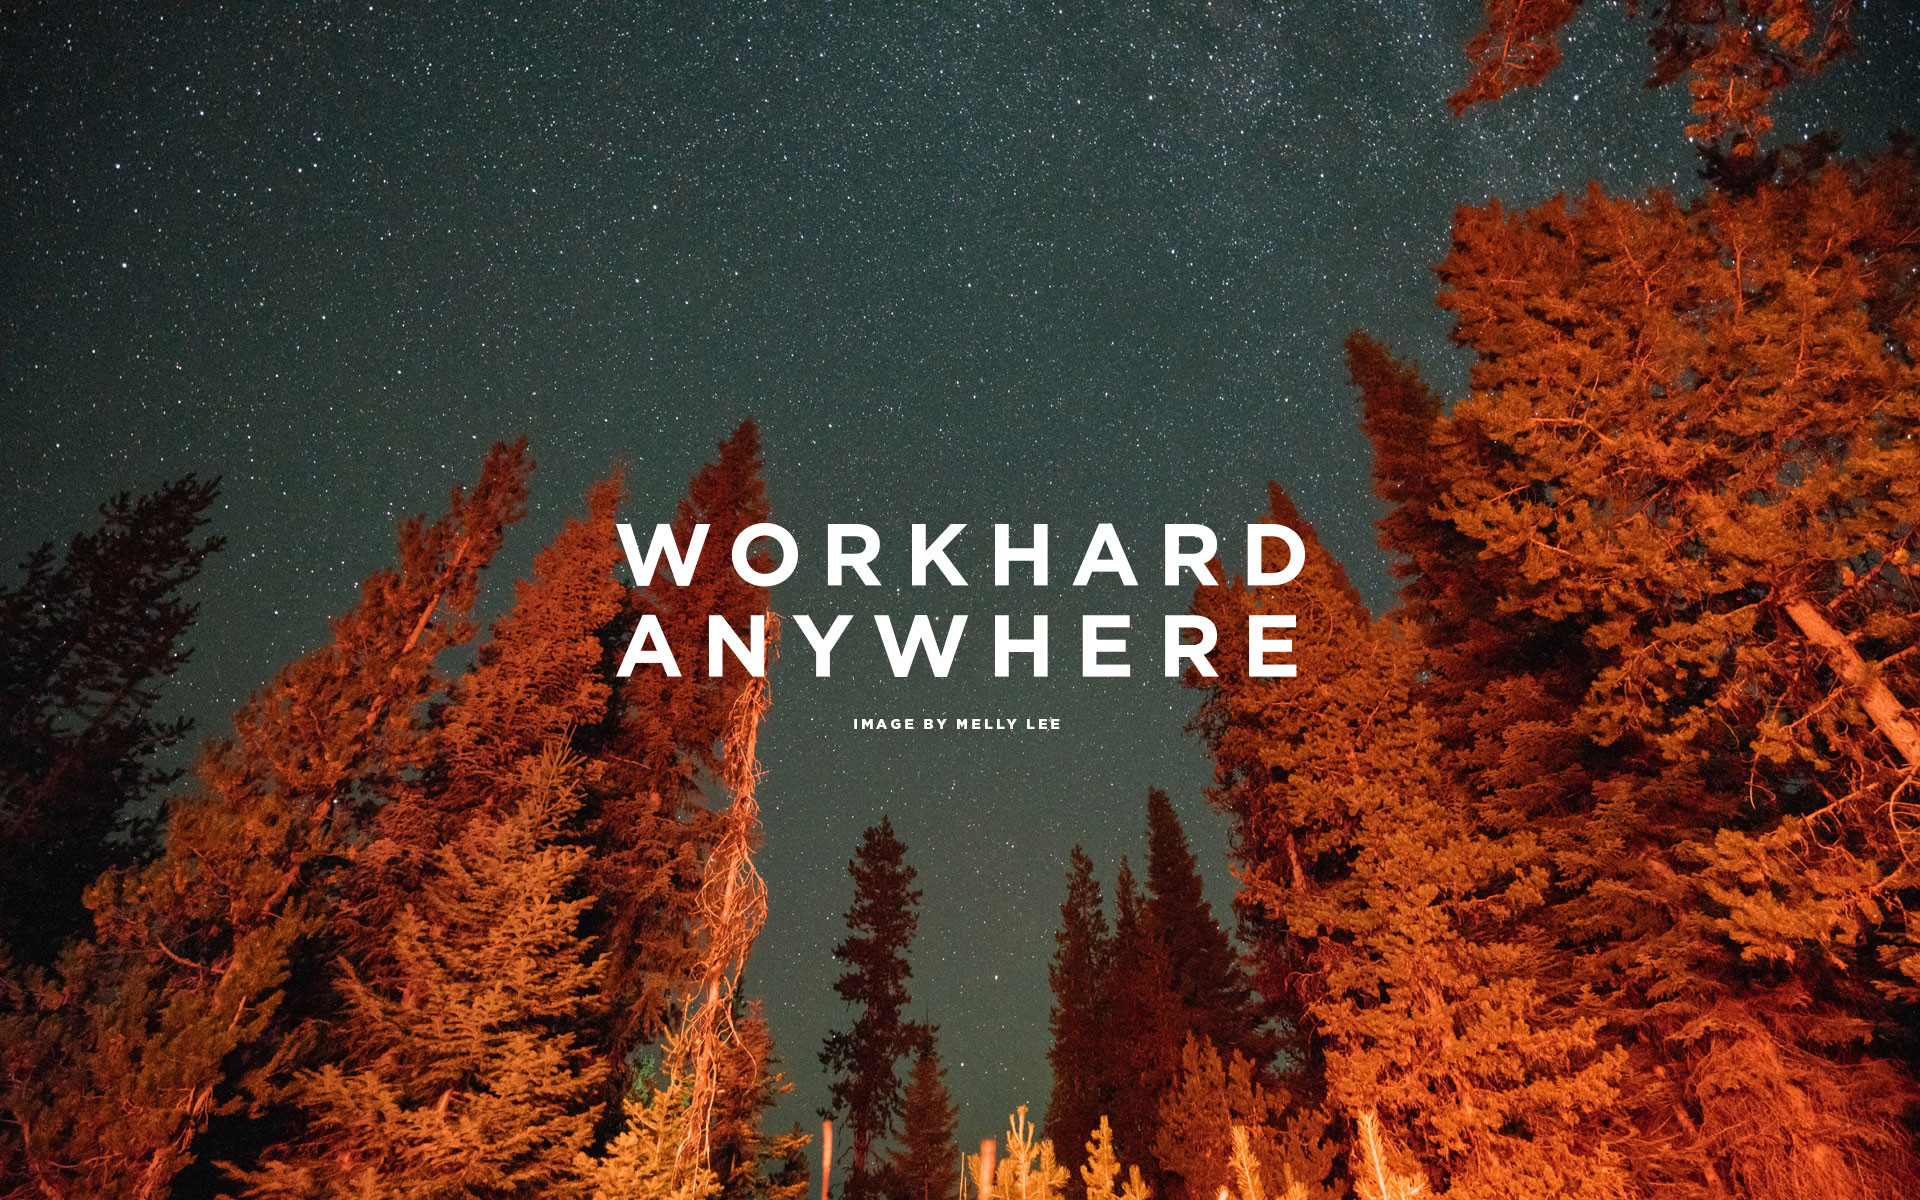 1920x1200 Stars - Work Hard Anywhere | WHA — Laptop-friendly cafes and spaces. (Wifi,  outlets, seating, and more) | WALLPAPERS - Work Hard Any Where | Pinterest  ...